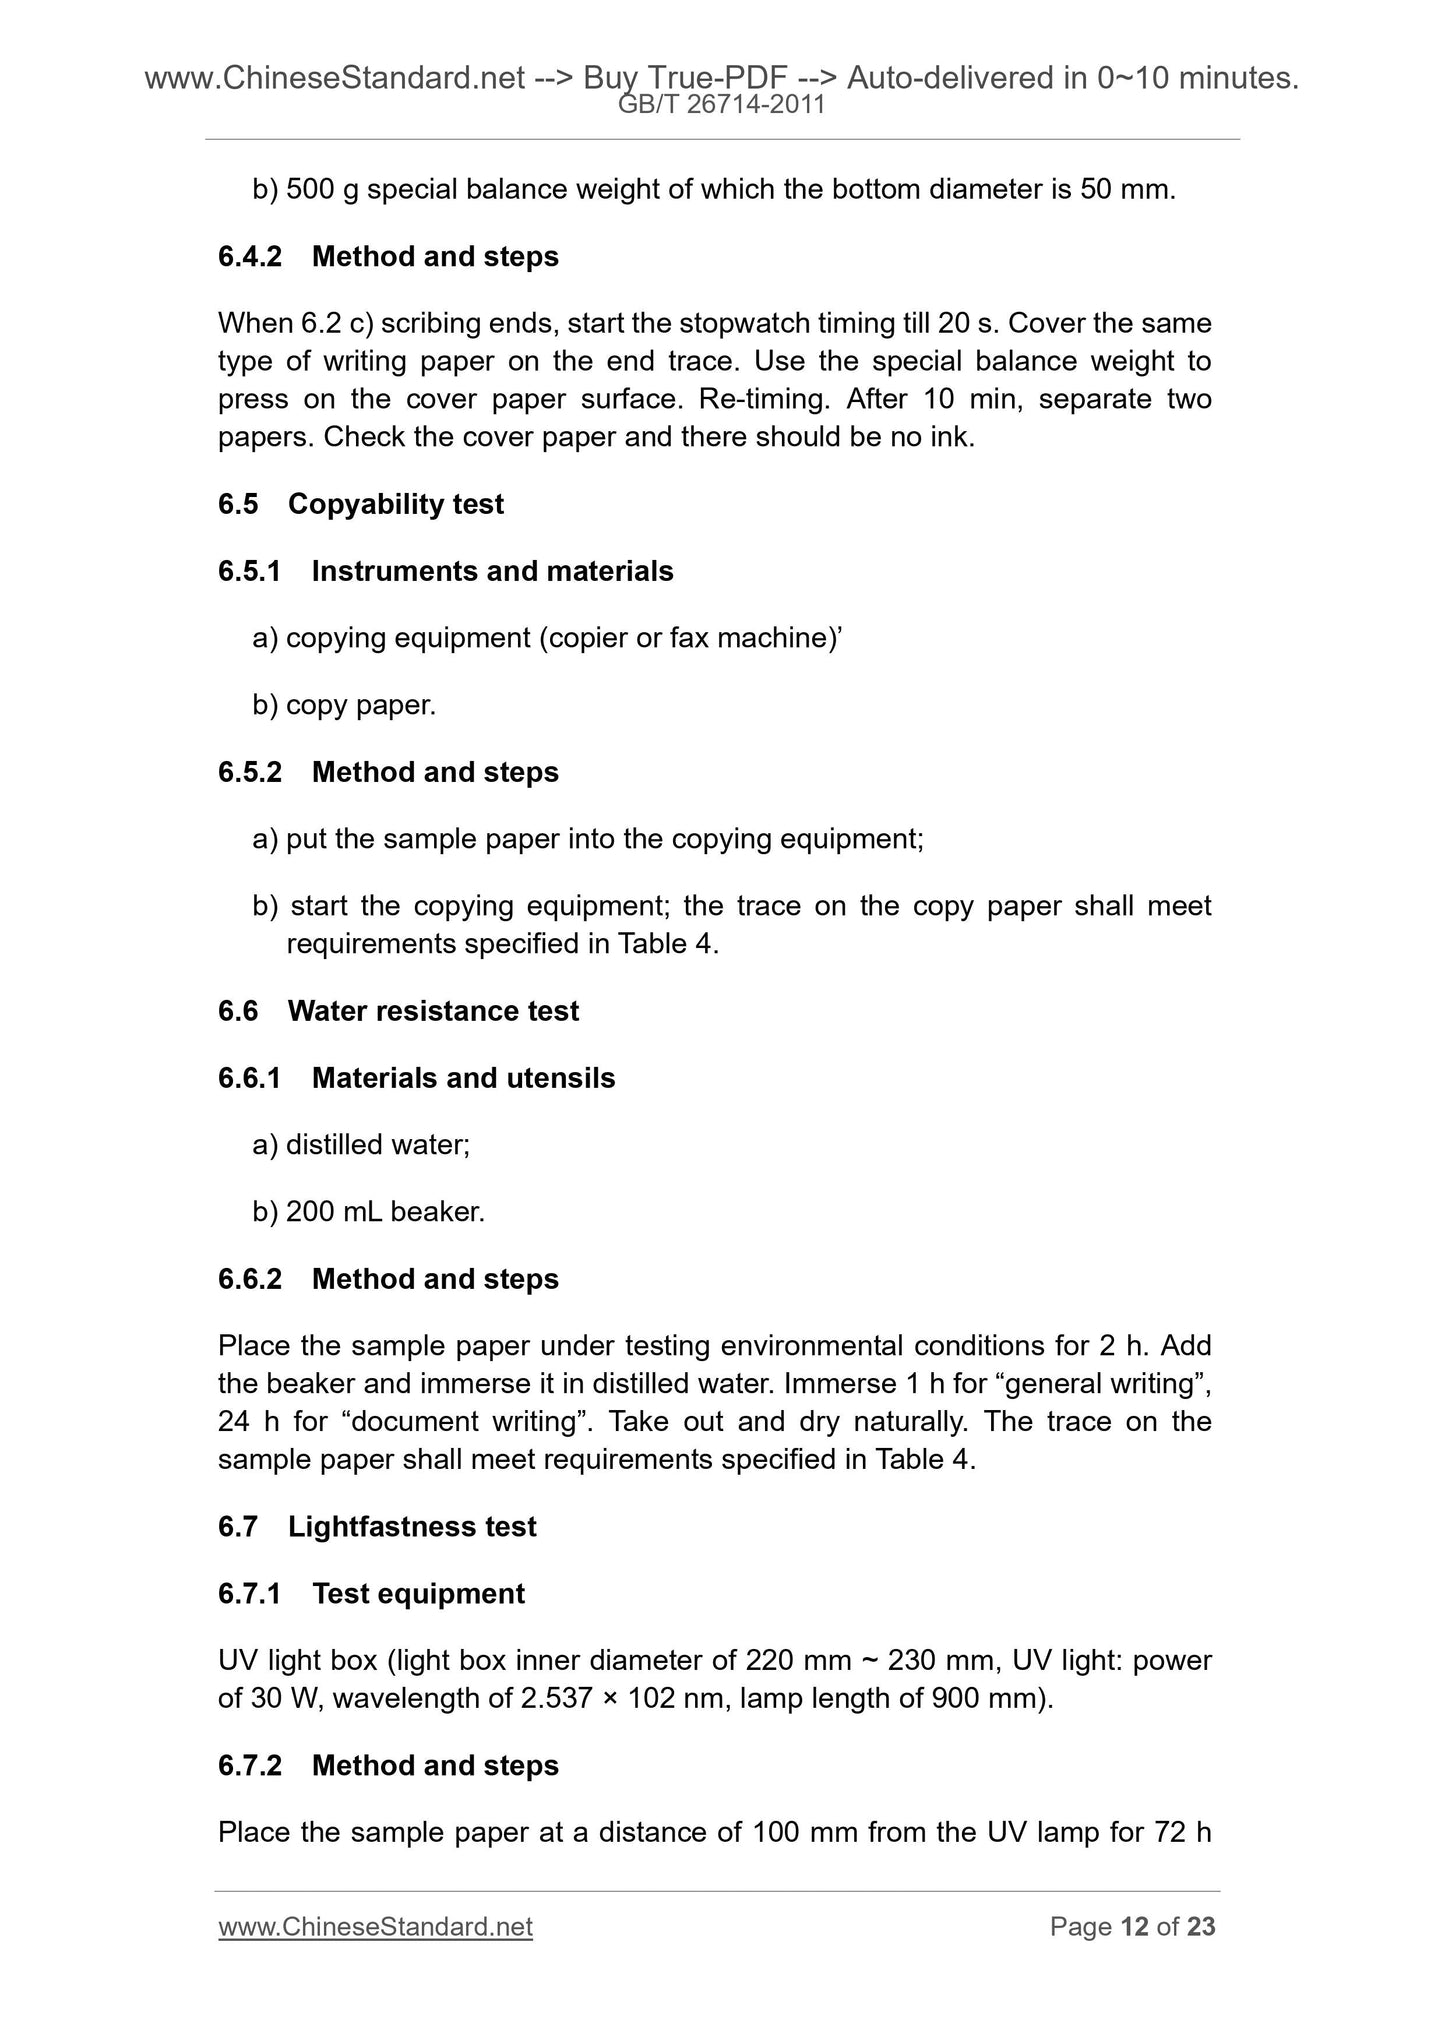 GB/T 26714-2011 Page 6